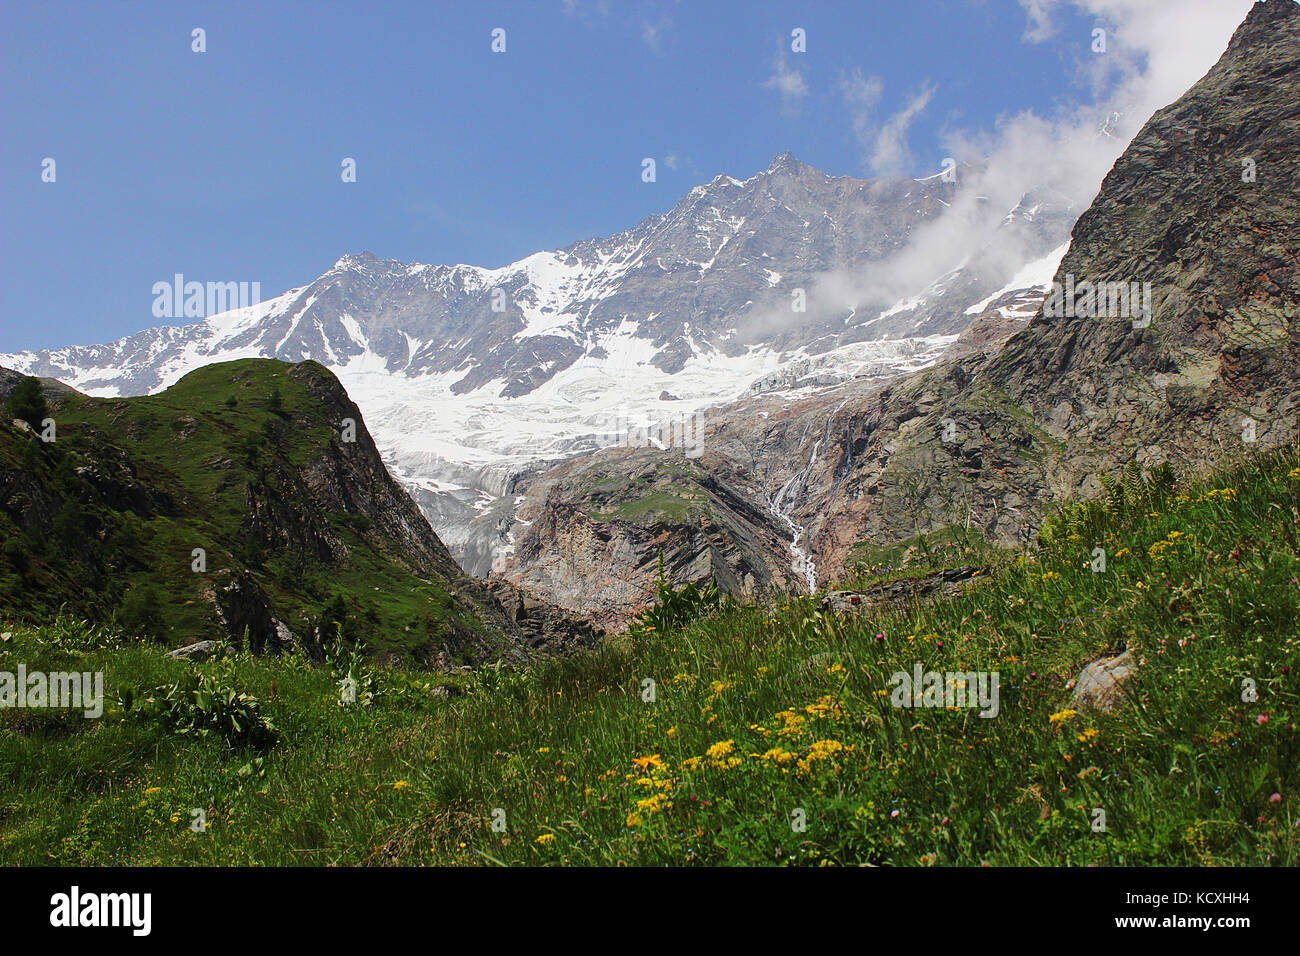 Dom and the surrounding mountains of Saas Fee and the Alpine meadows in Valais, Switzerland. Stock Photo